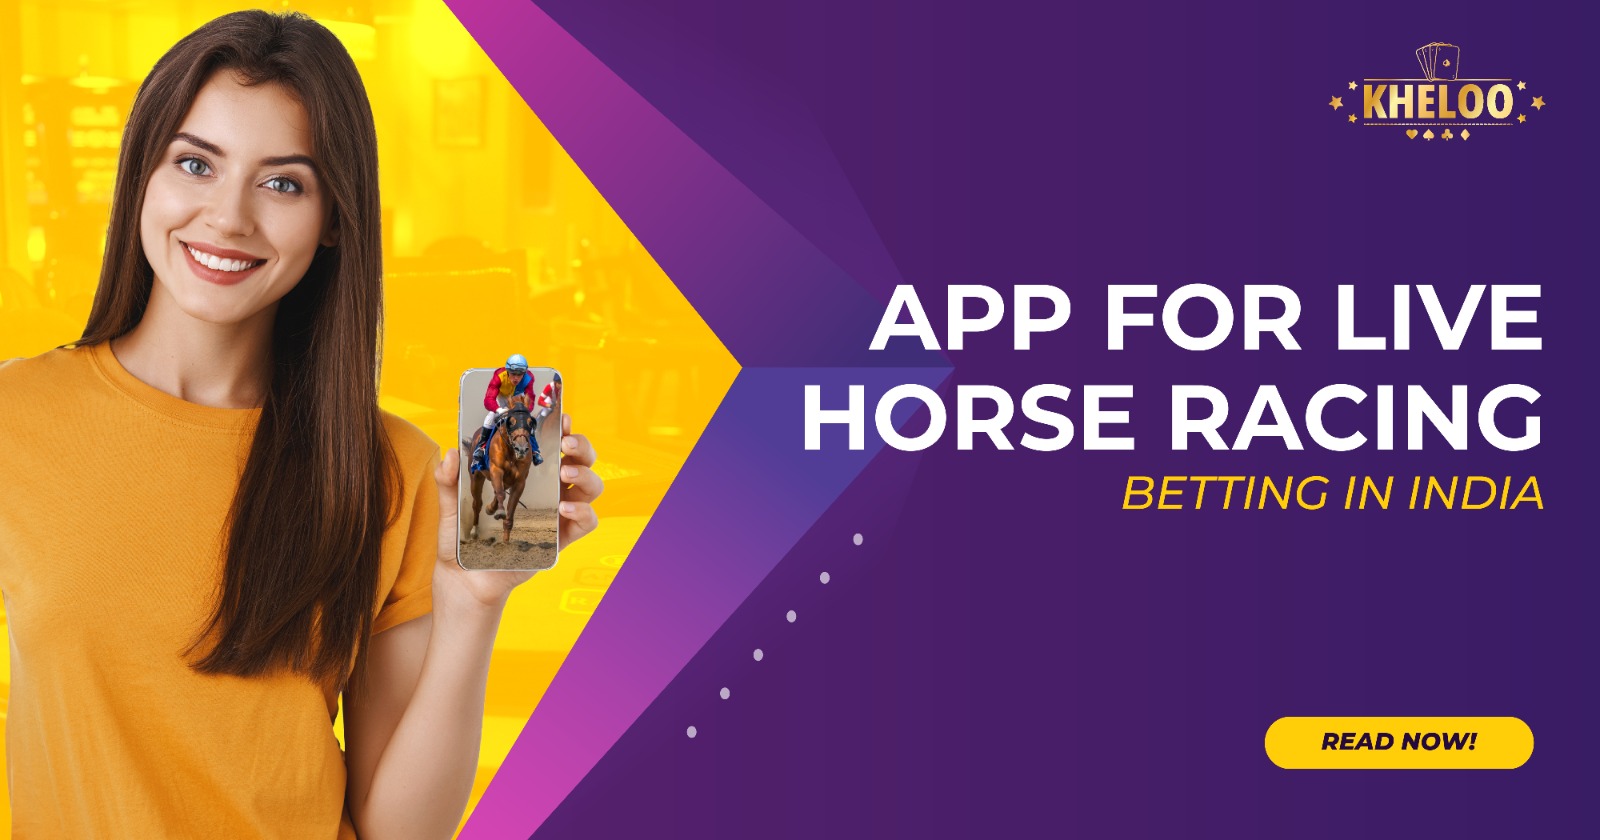 App for Live Horse Racing Betting in India - Kheloo